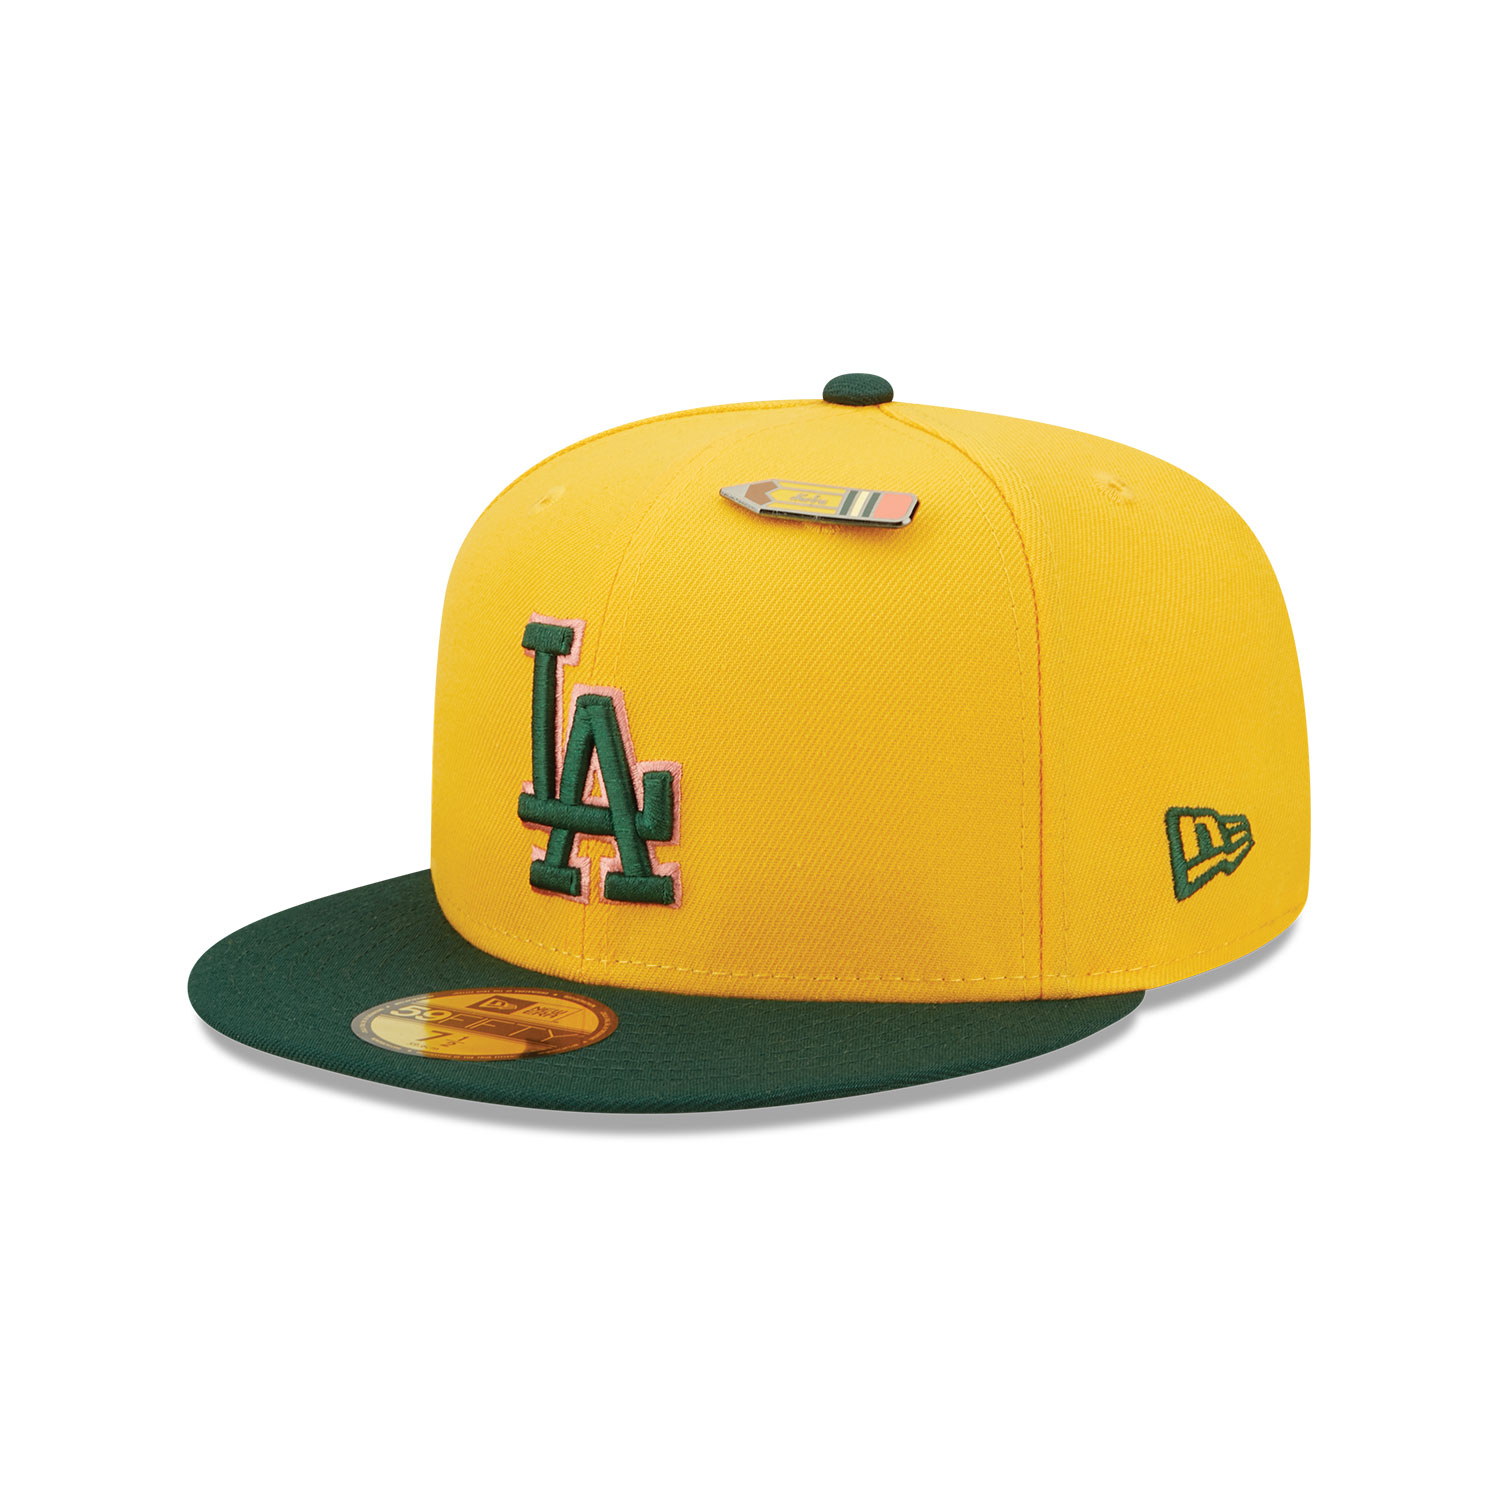 Official New Era LA Dodgers MLB Back to School Yellow 59FIFTY Fitted